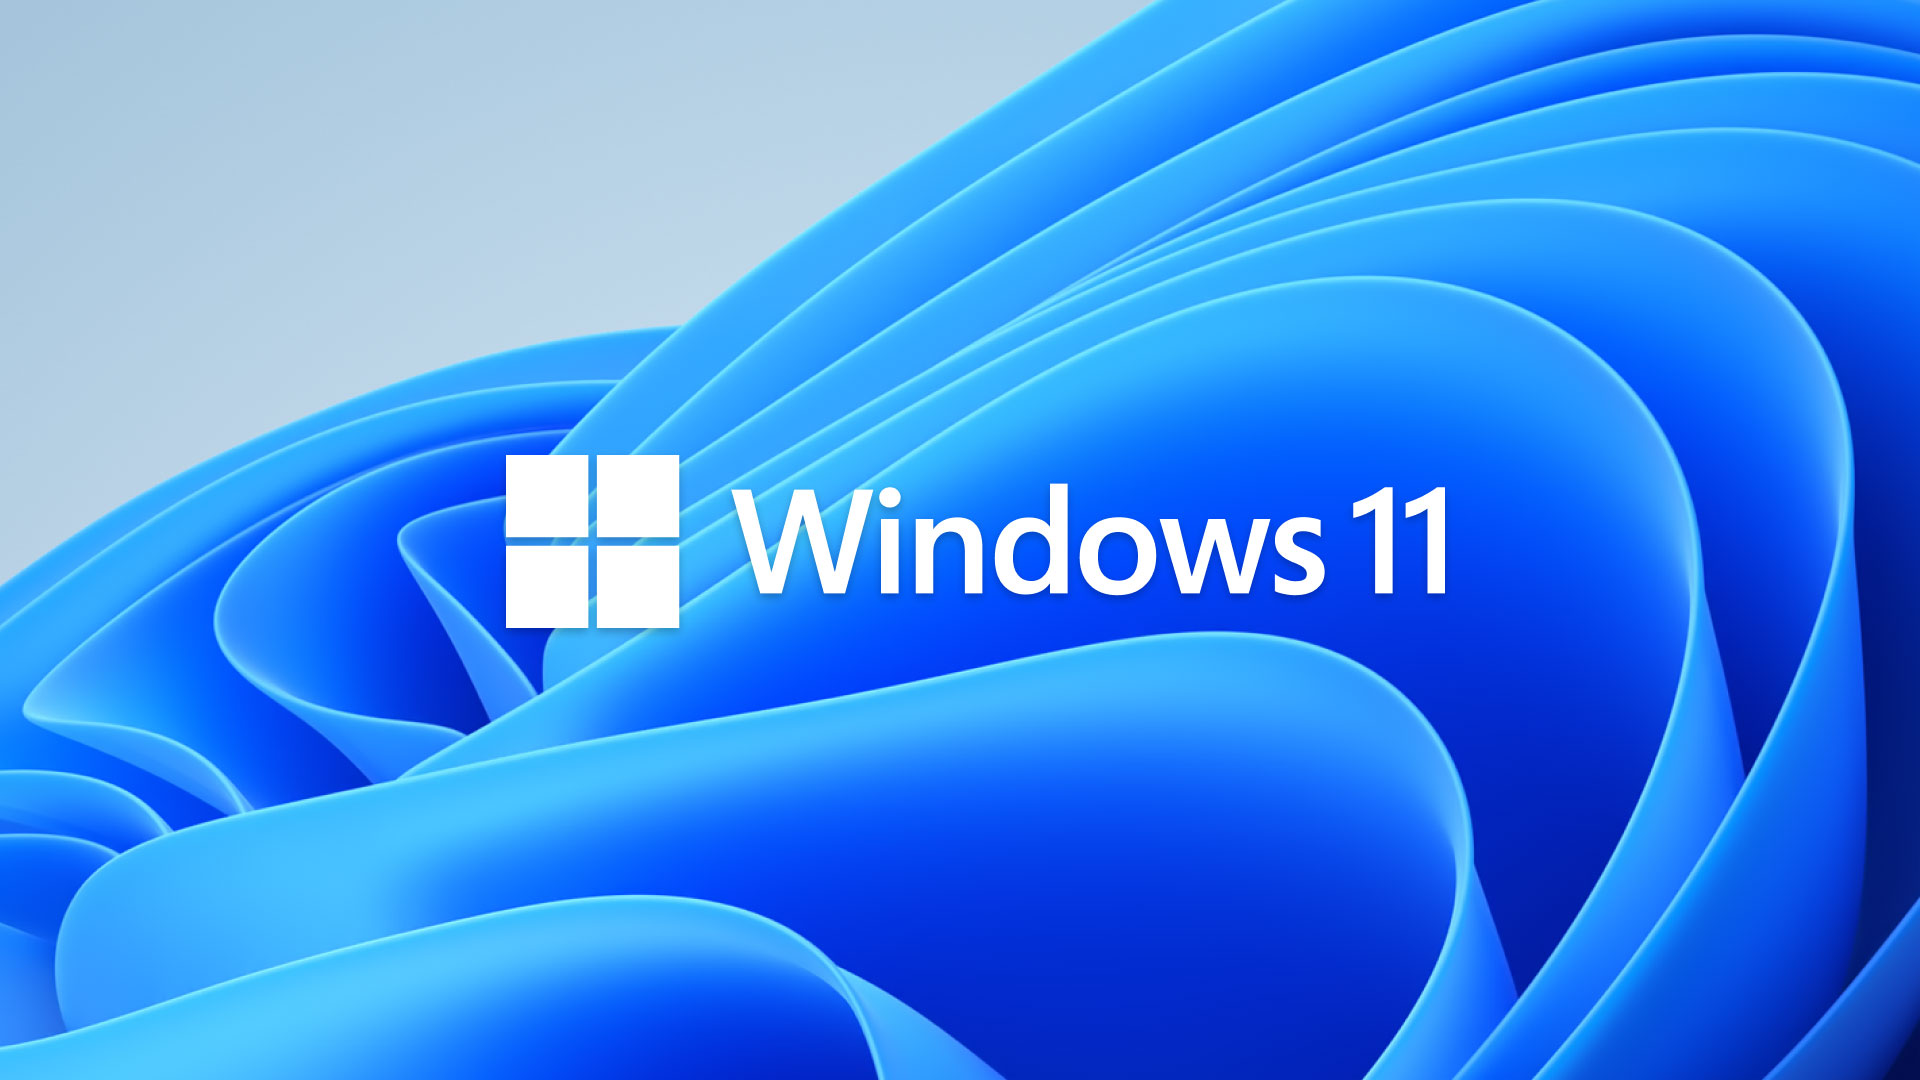 Windows 11 announcement features, release date, price, and more EnD